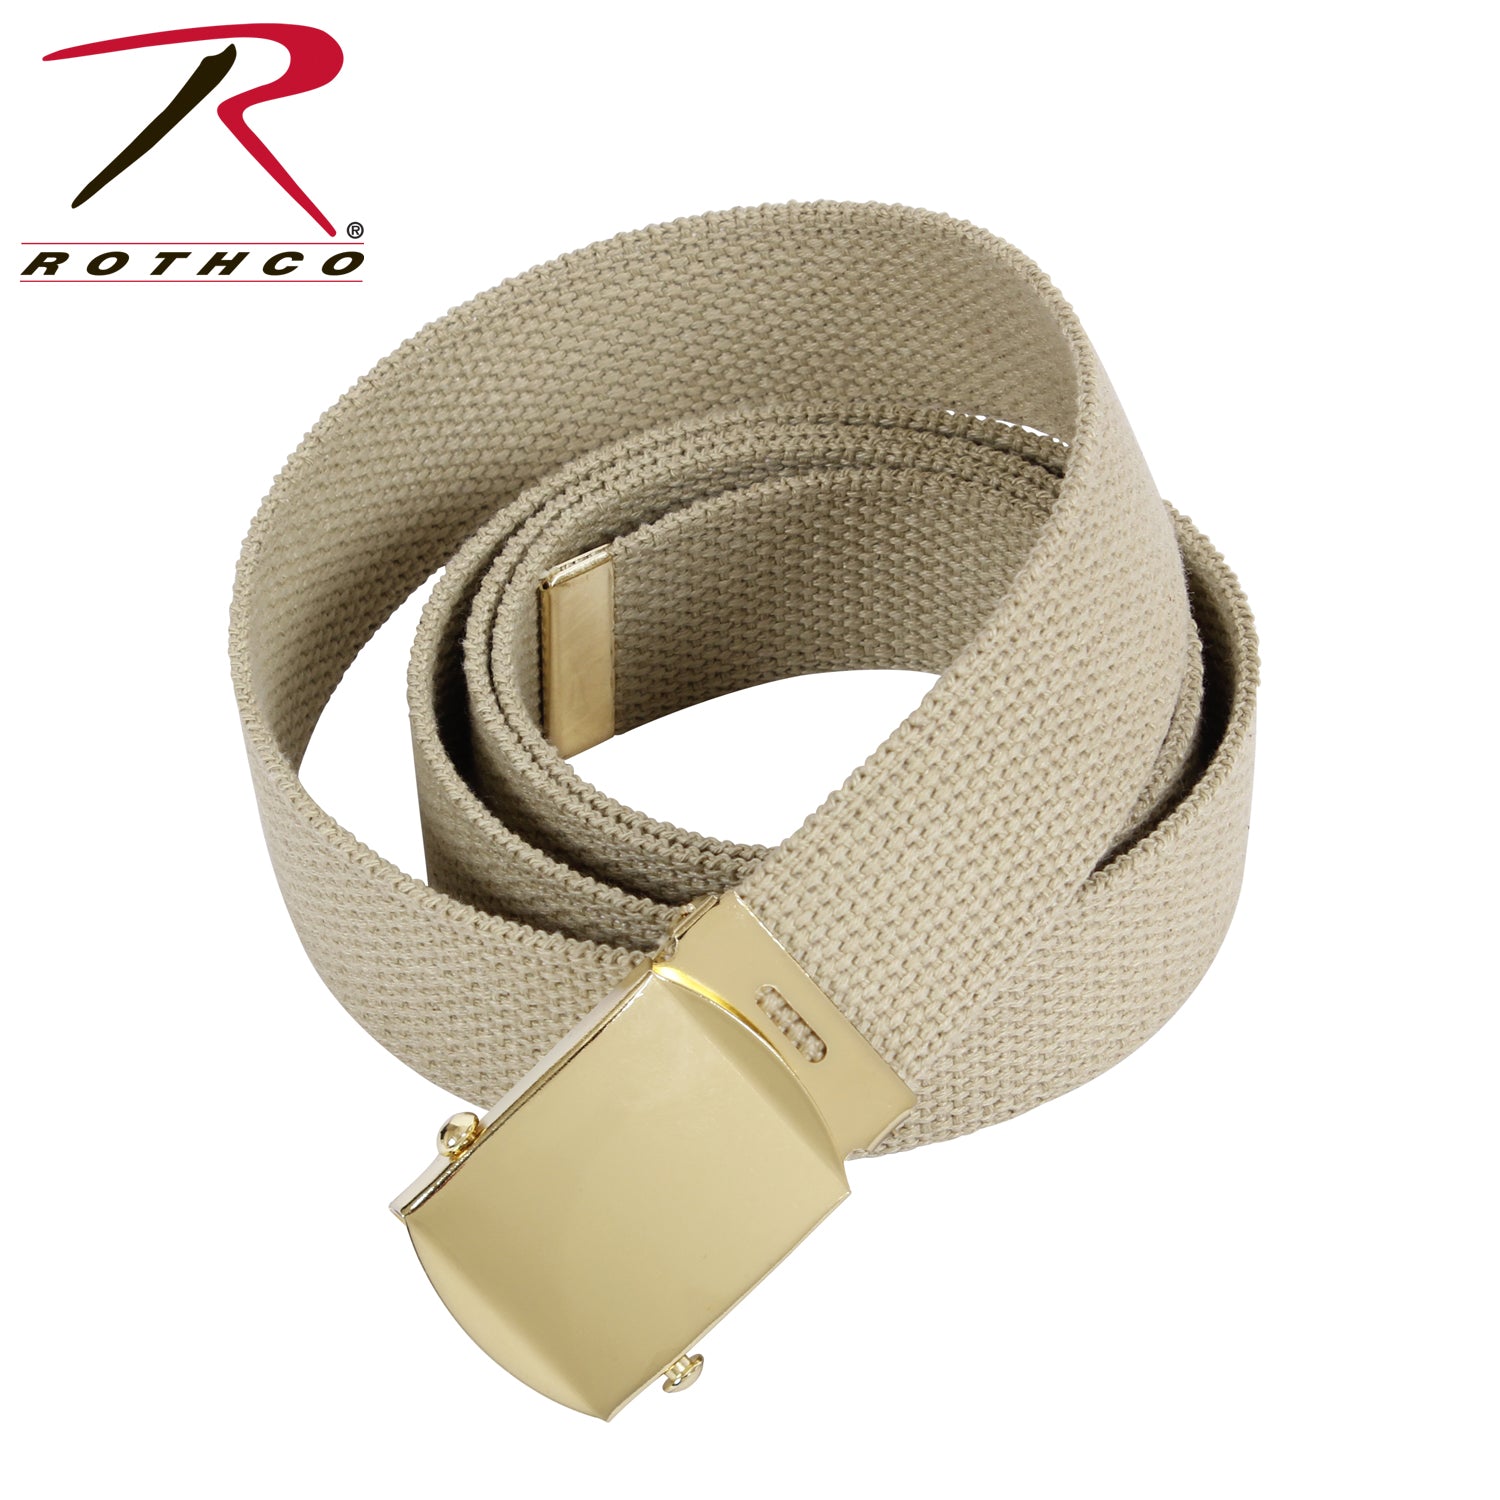 Rothco Military Web Belt - 44 Inches Long